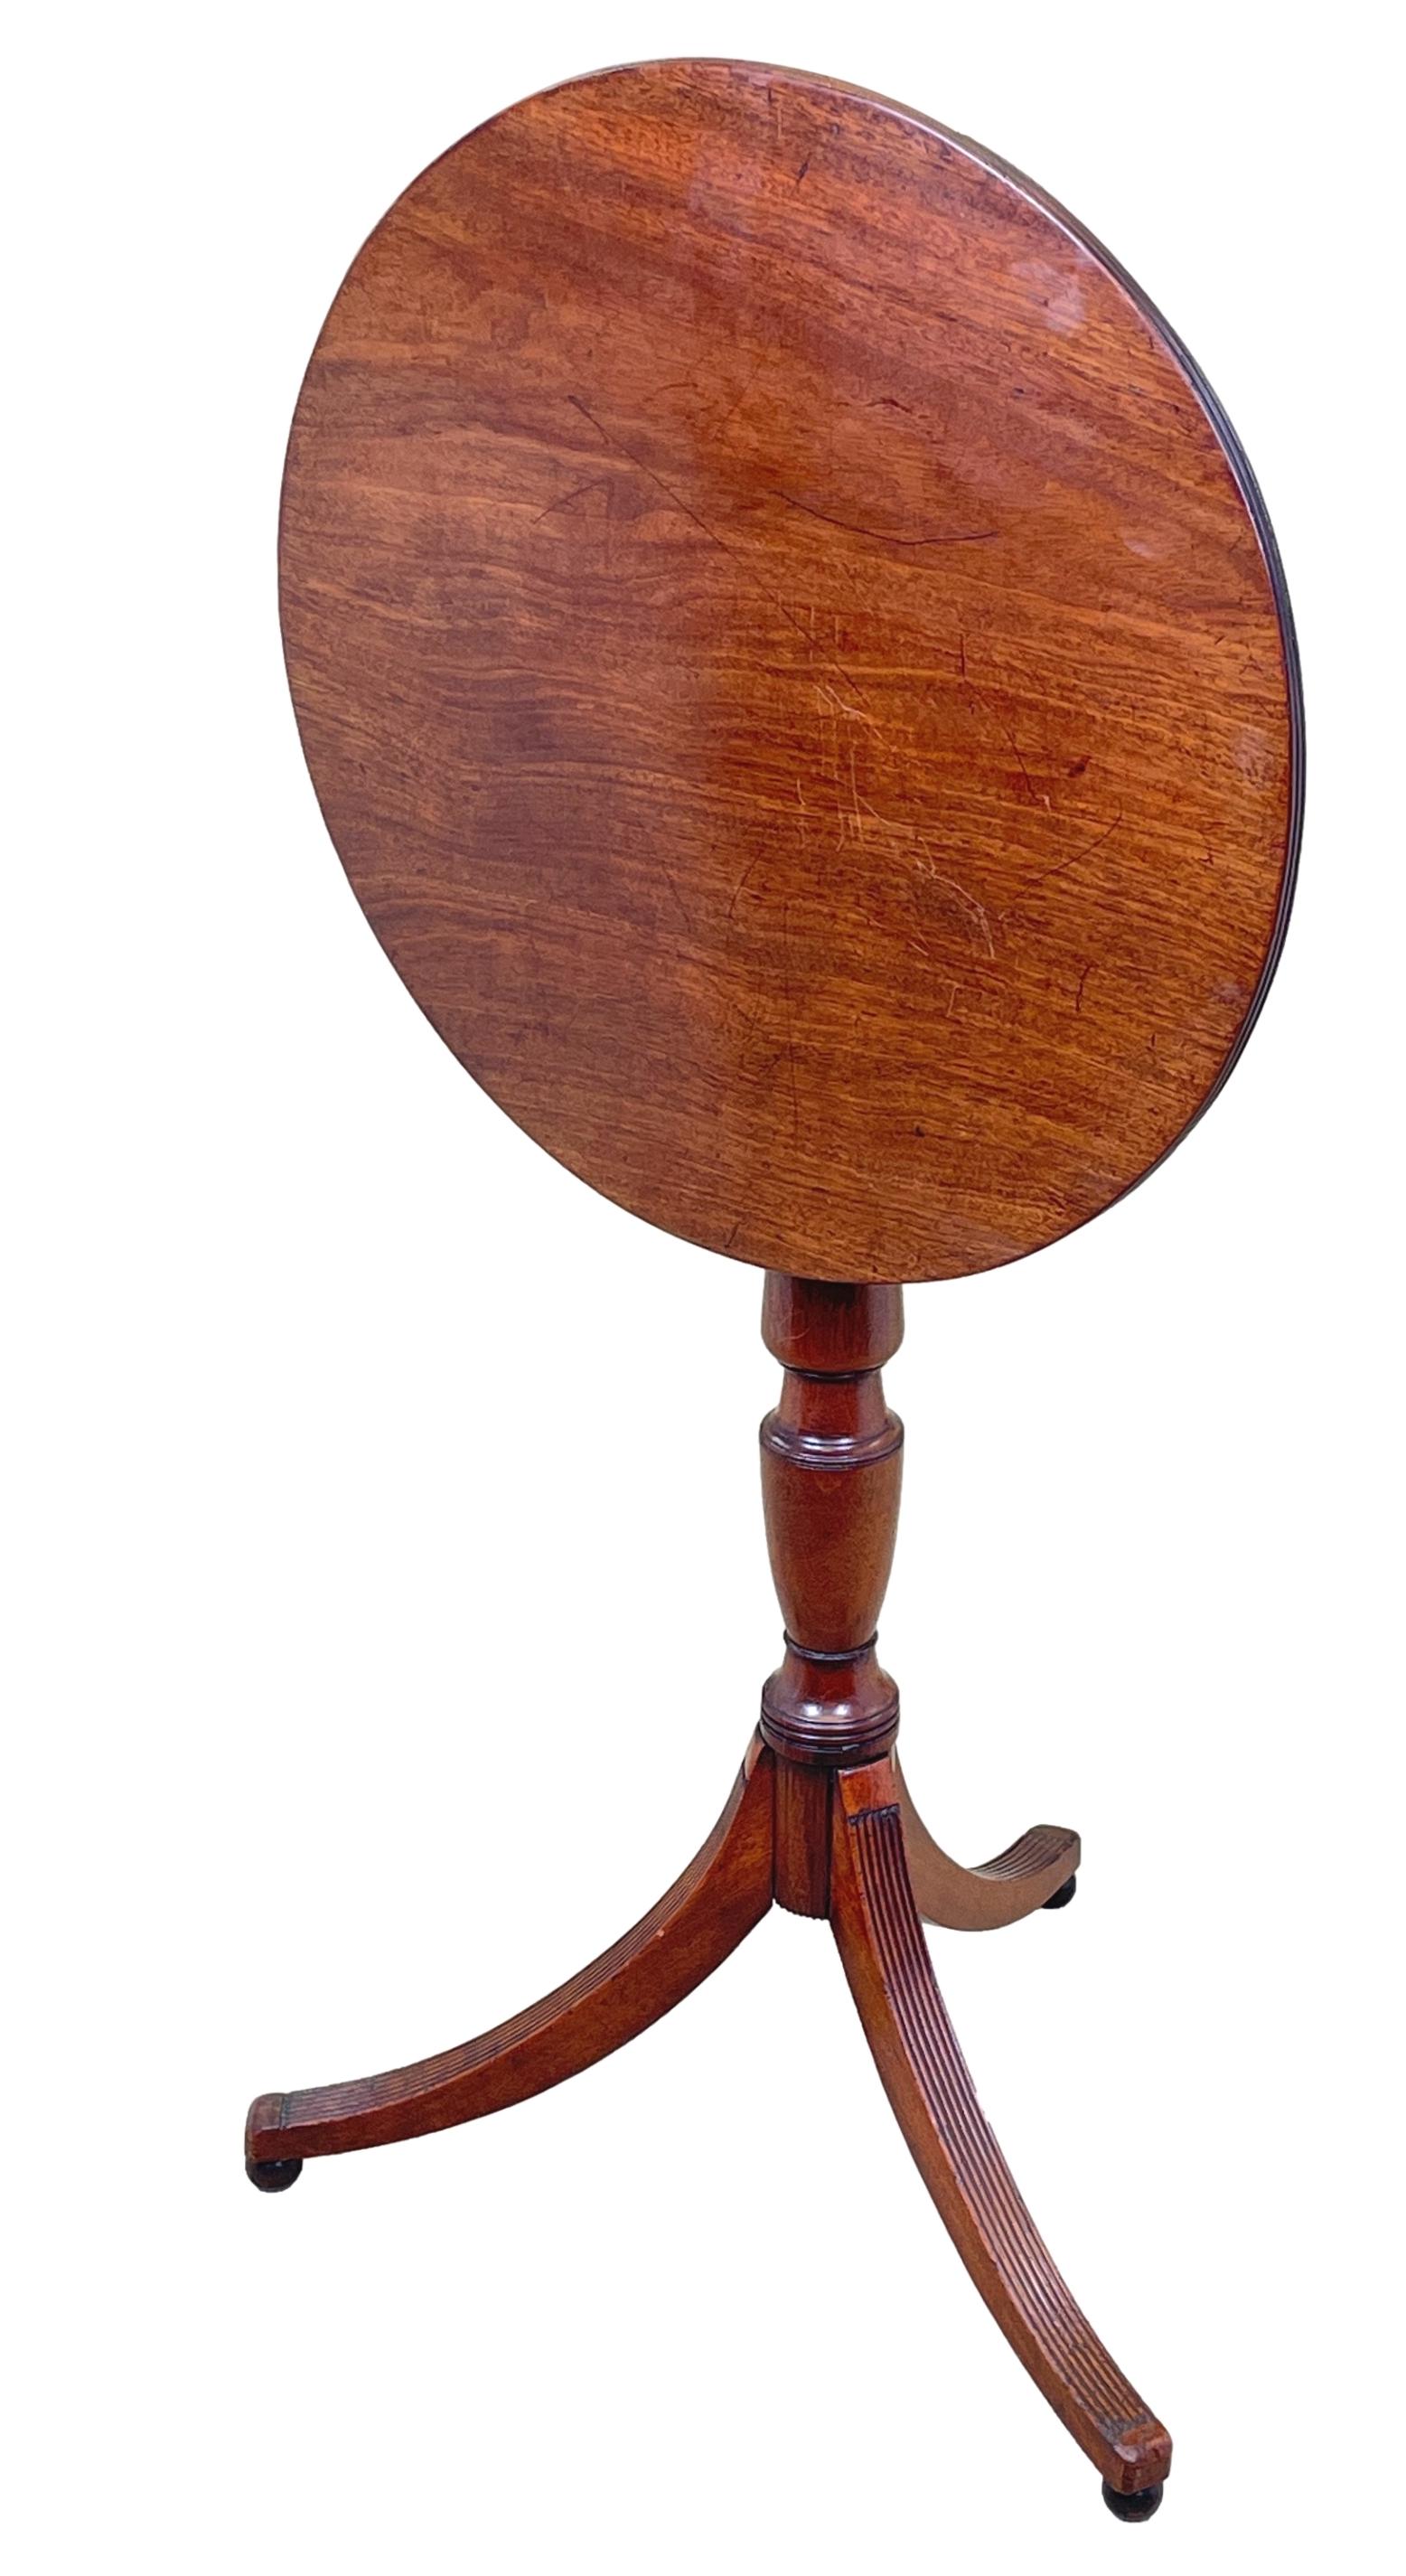 A Good Quality George III Period Mahogany Wine Table, Having Well Figured Circular Tilting Top With Elegant Reeded Edge, Raised On Turned Central Column Terminating With Elegant Reeded Tripod Legs And Turned Ball Feet.


Simple, but effective